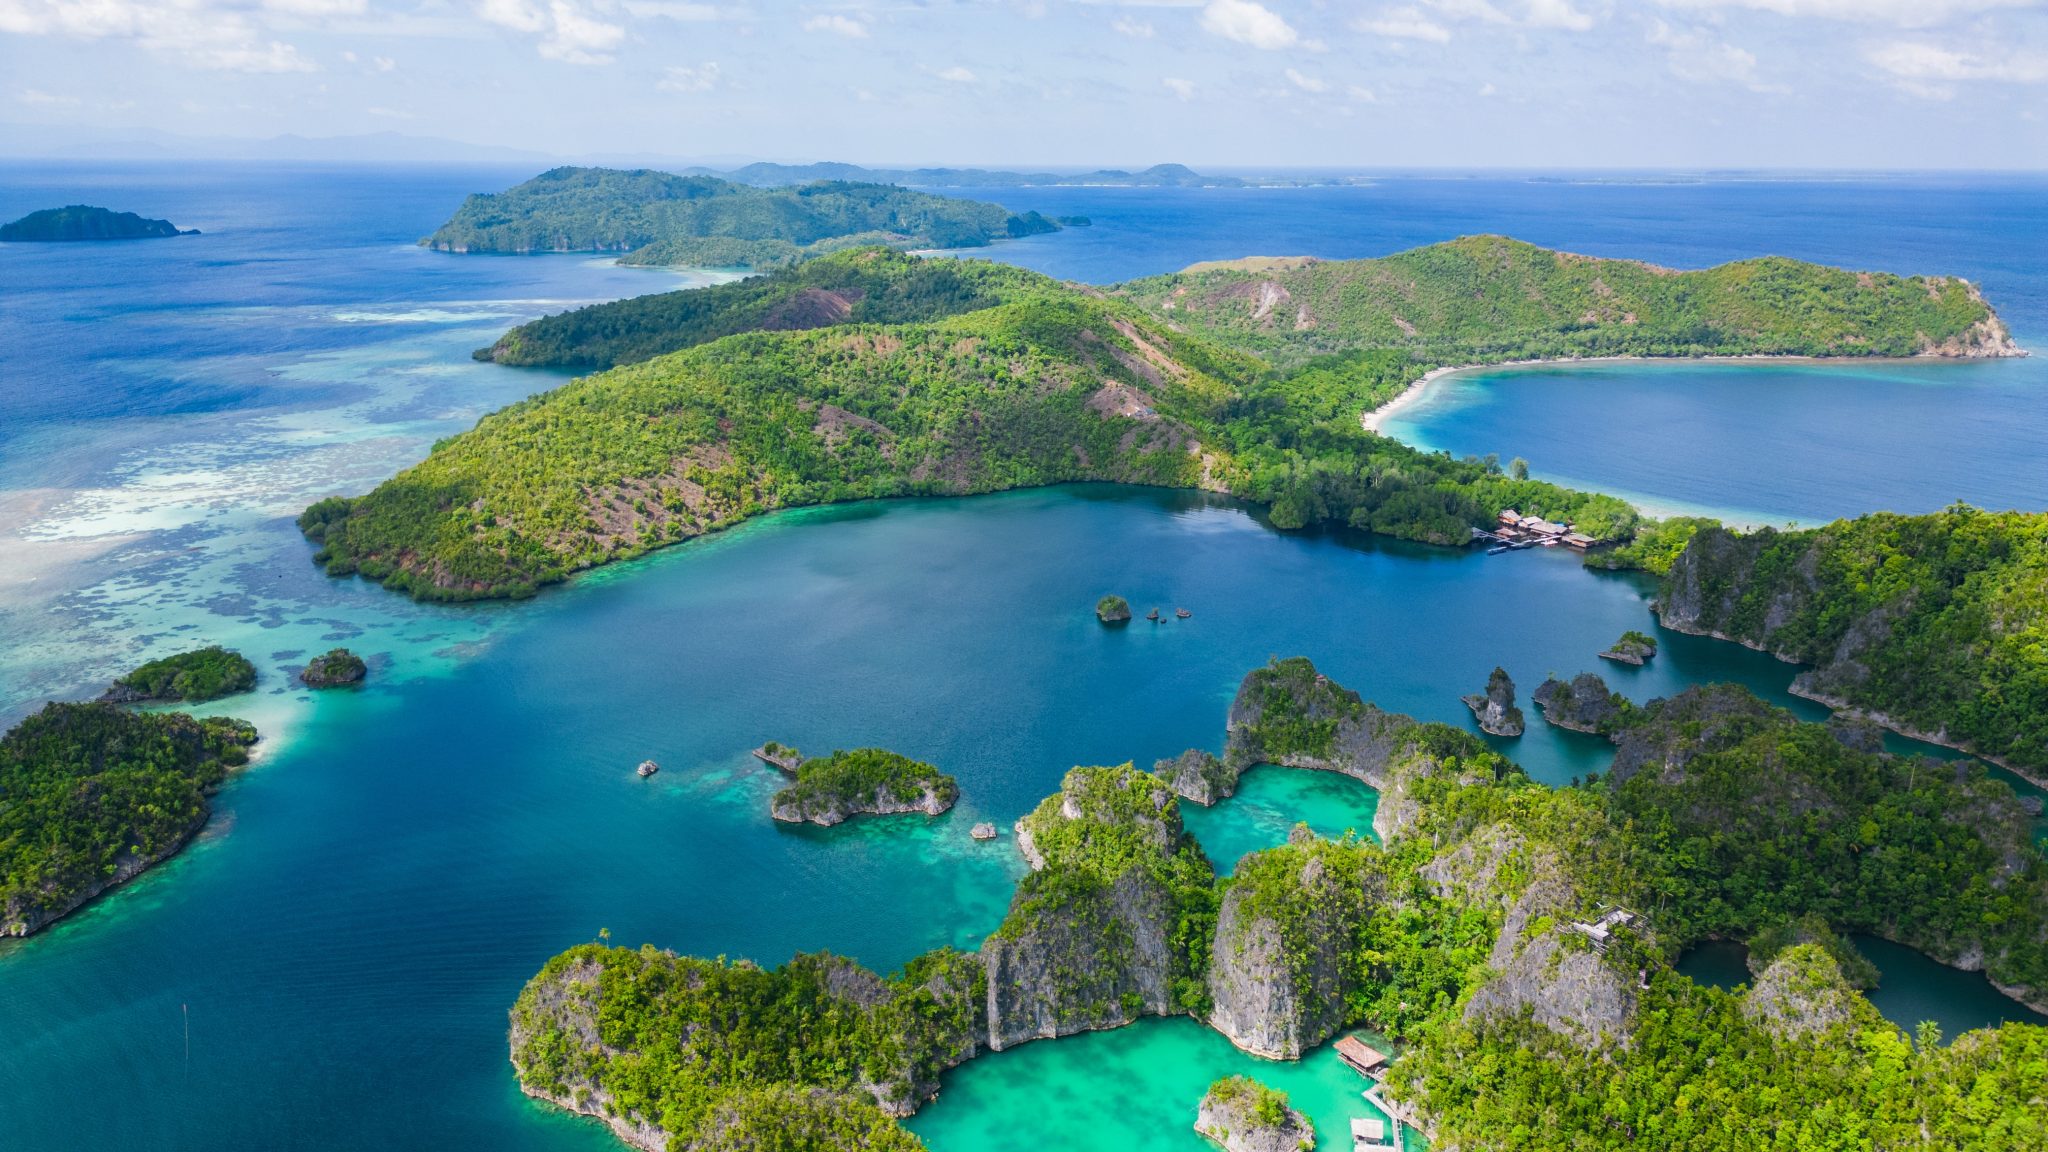 EVERYTHING YOU NEED TO KNOW ABOUT VISITING RAJA AMPAT, INDONESIA